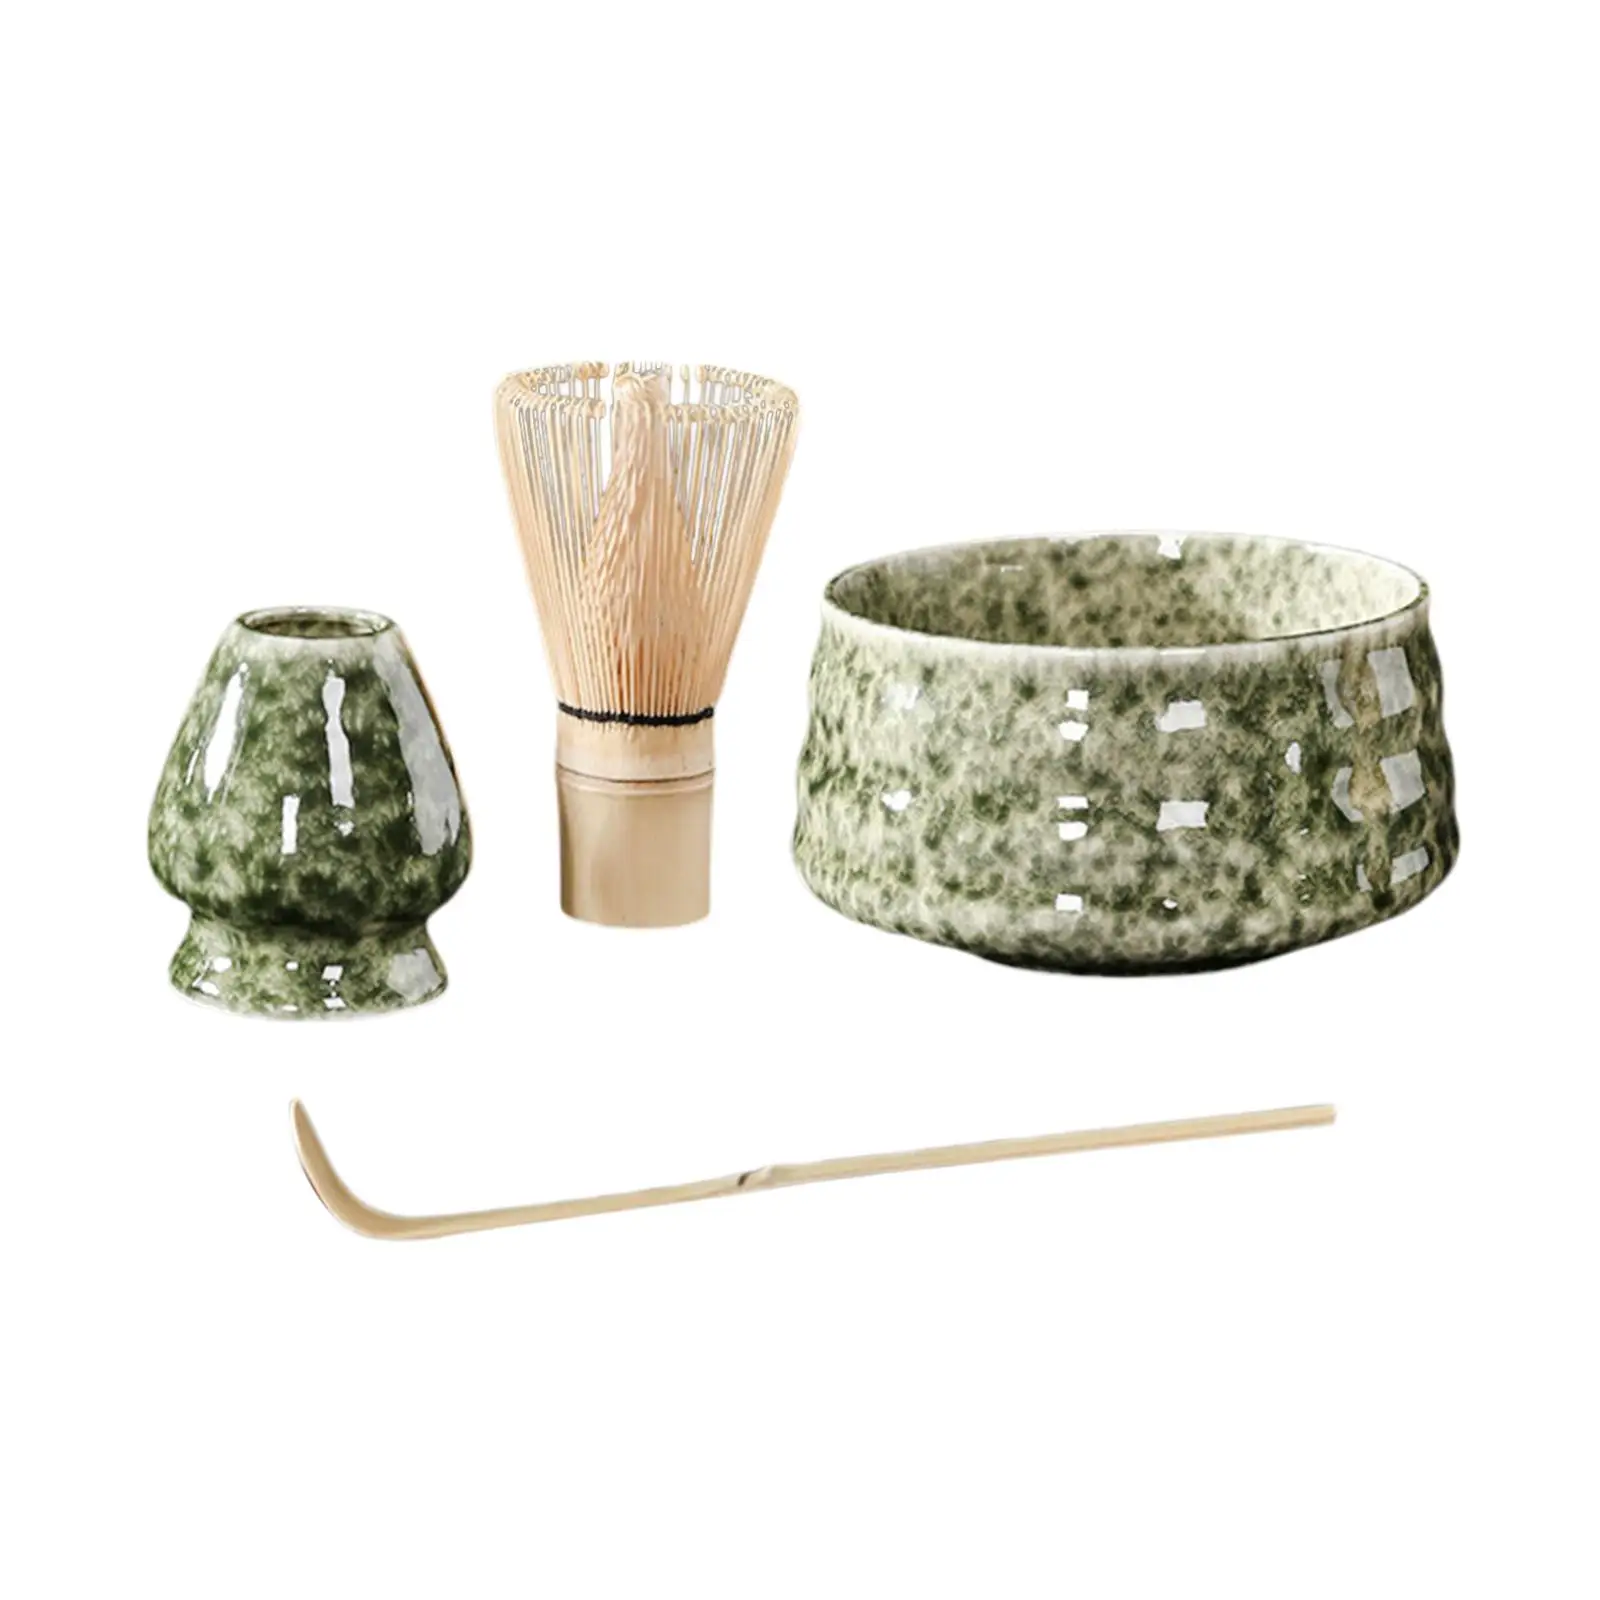 4 Pieces Japanese Matcha Whisk Set with Accessories and Tools for Friends Best Gifts